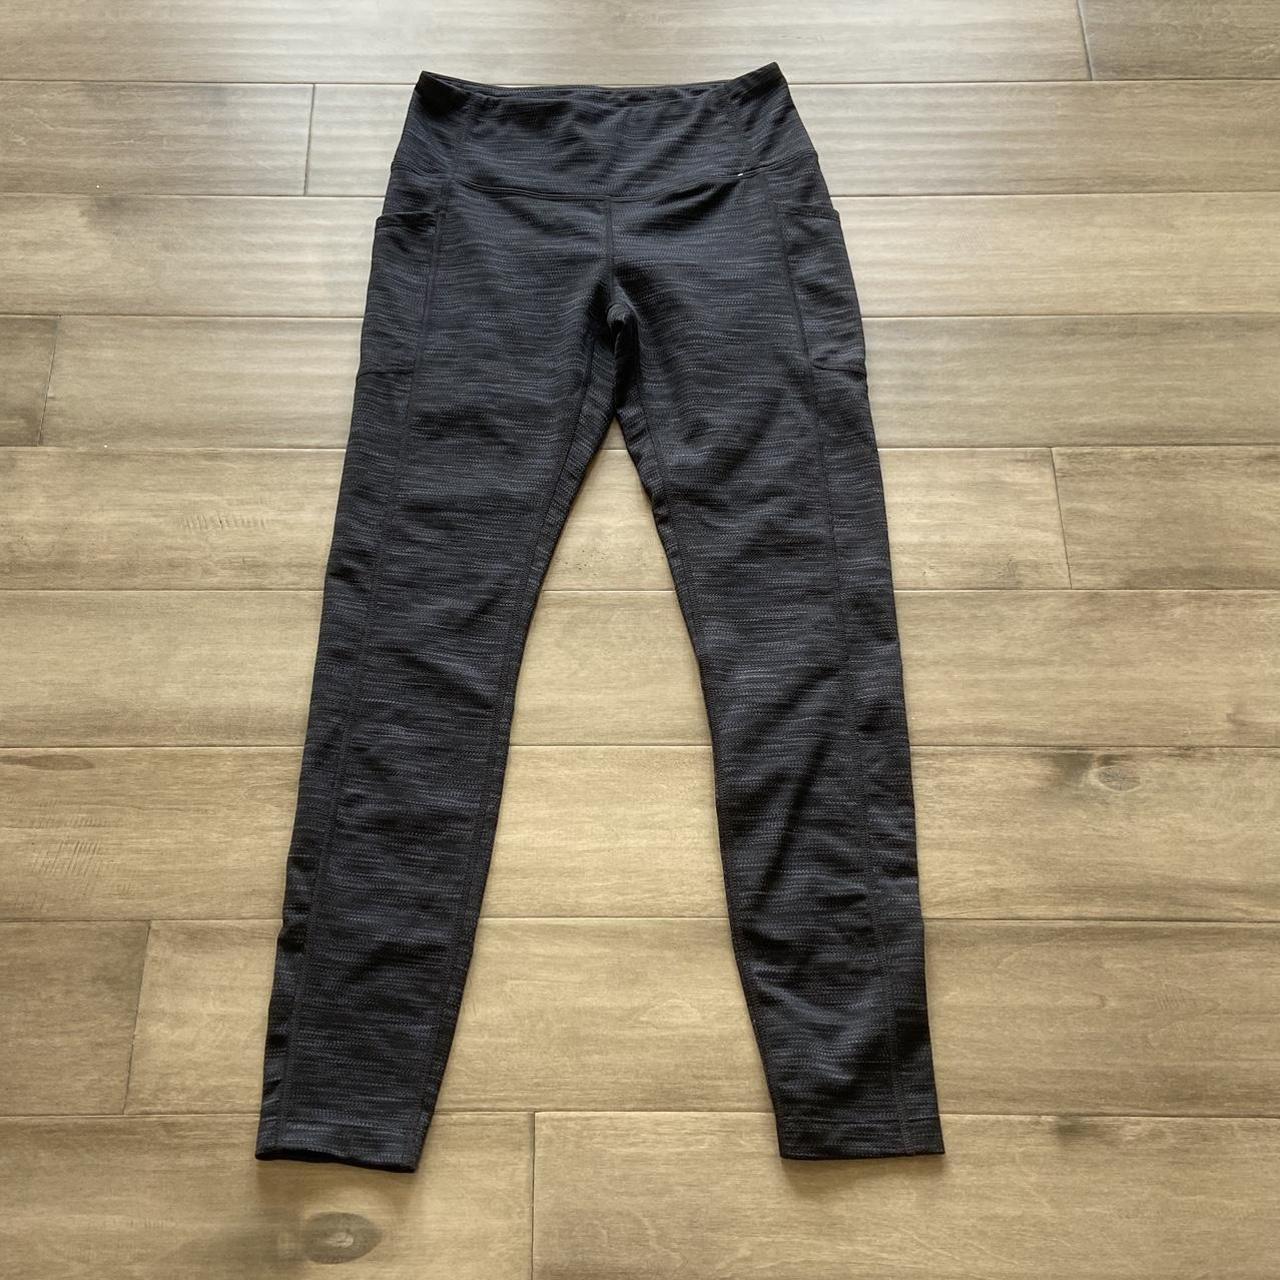 Heron Preston active leggings ,, tags cut out for - Depop